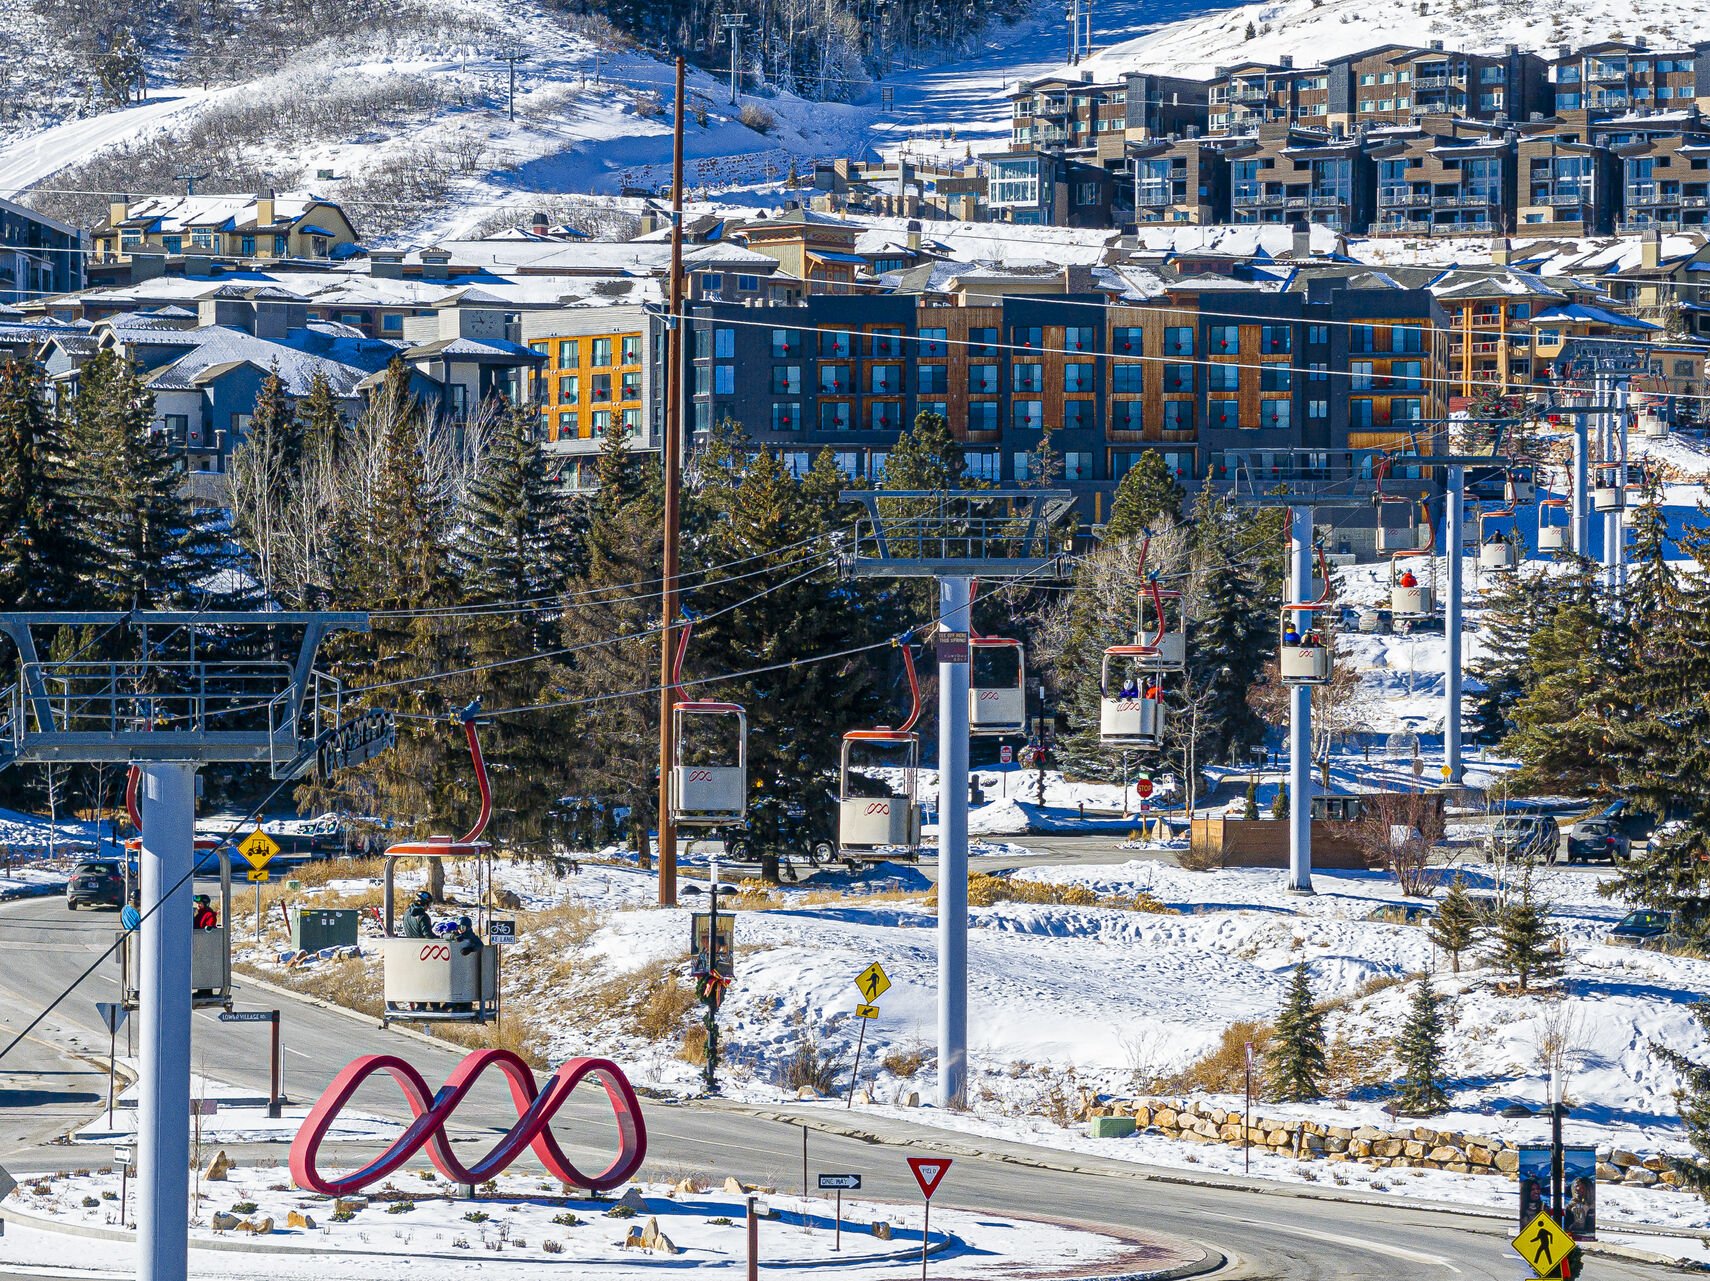 Walk to the Park City Canyons Village Cabriolet and Canyons Transit Center for free bus